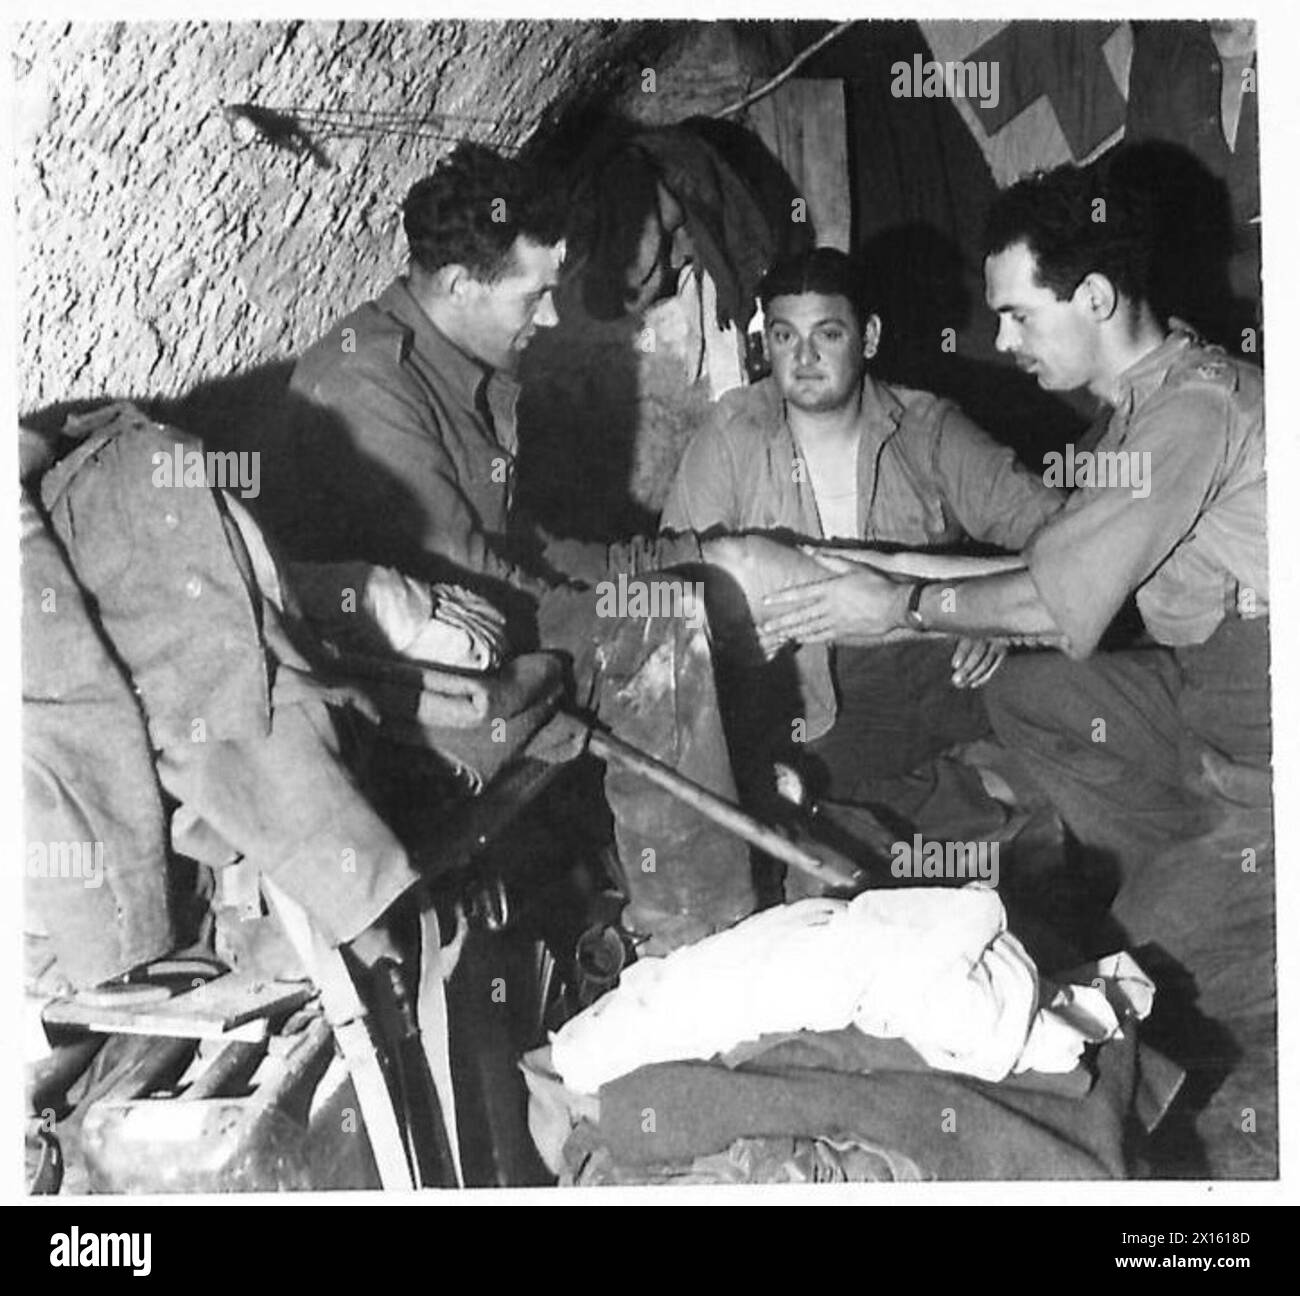 UNDERGROUND CONTROL - Capt. Brodie of Elgin, Scotland, the M.O., attends to the injuries of a Guardsman in the underground tunnels British Army Stock Photo